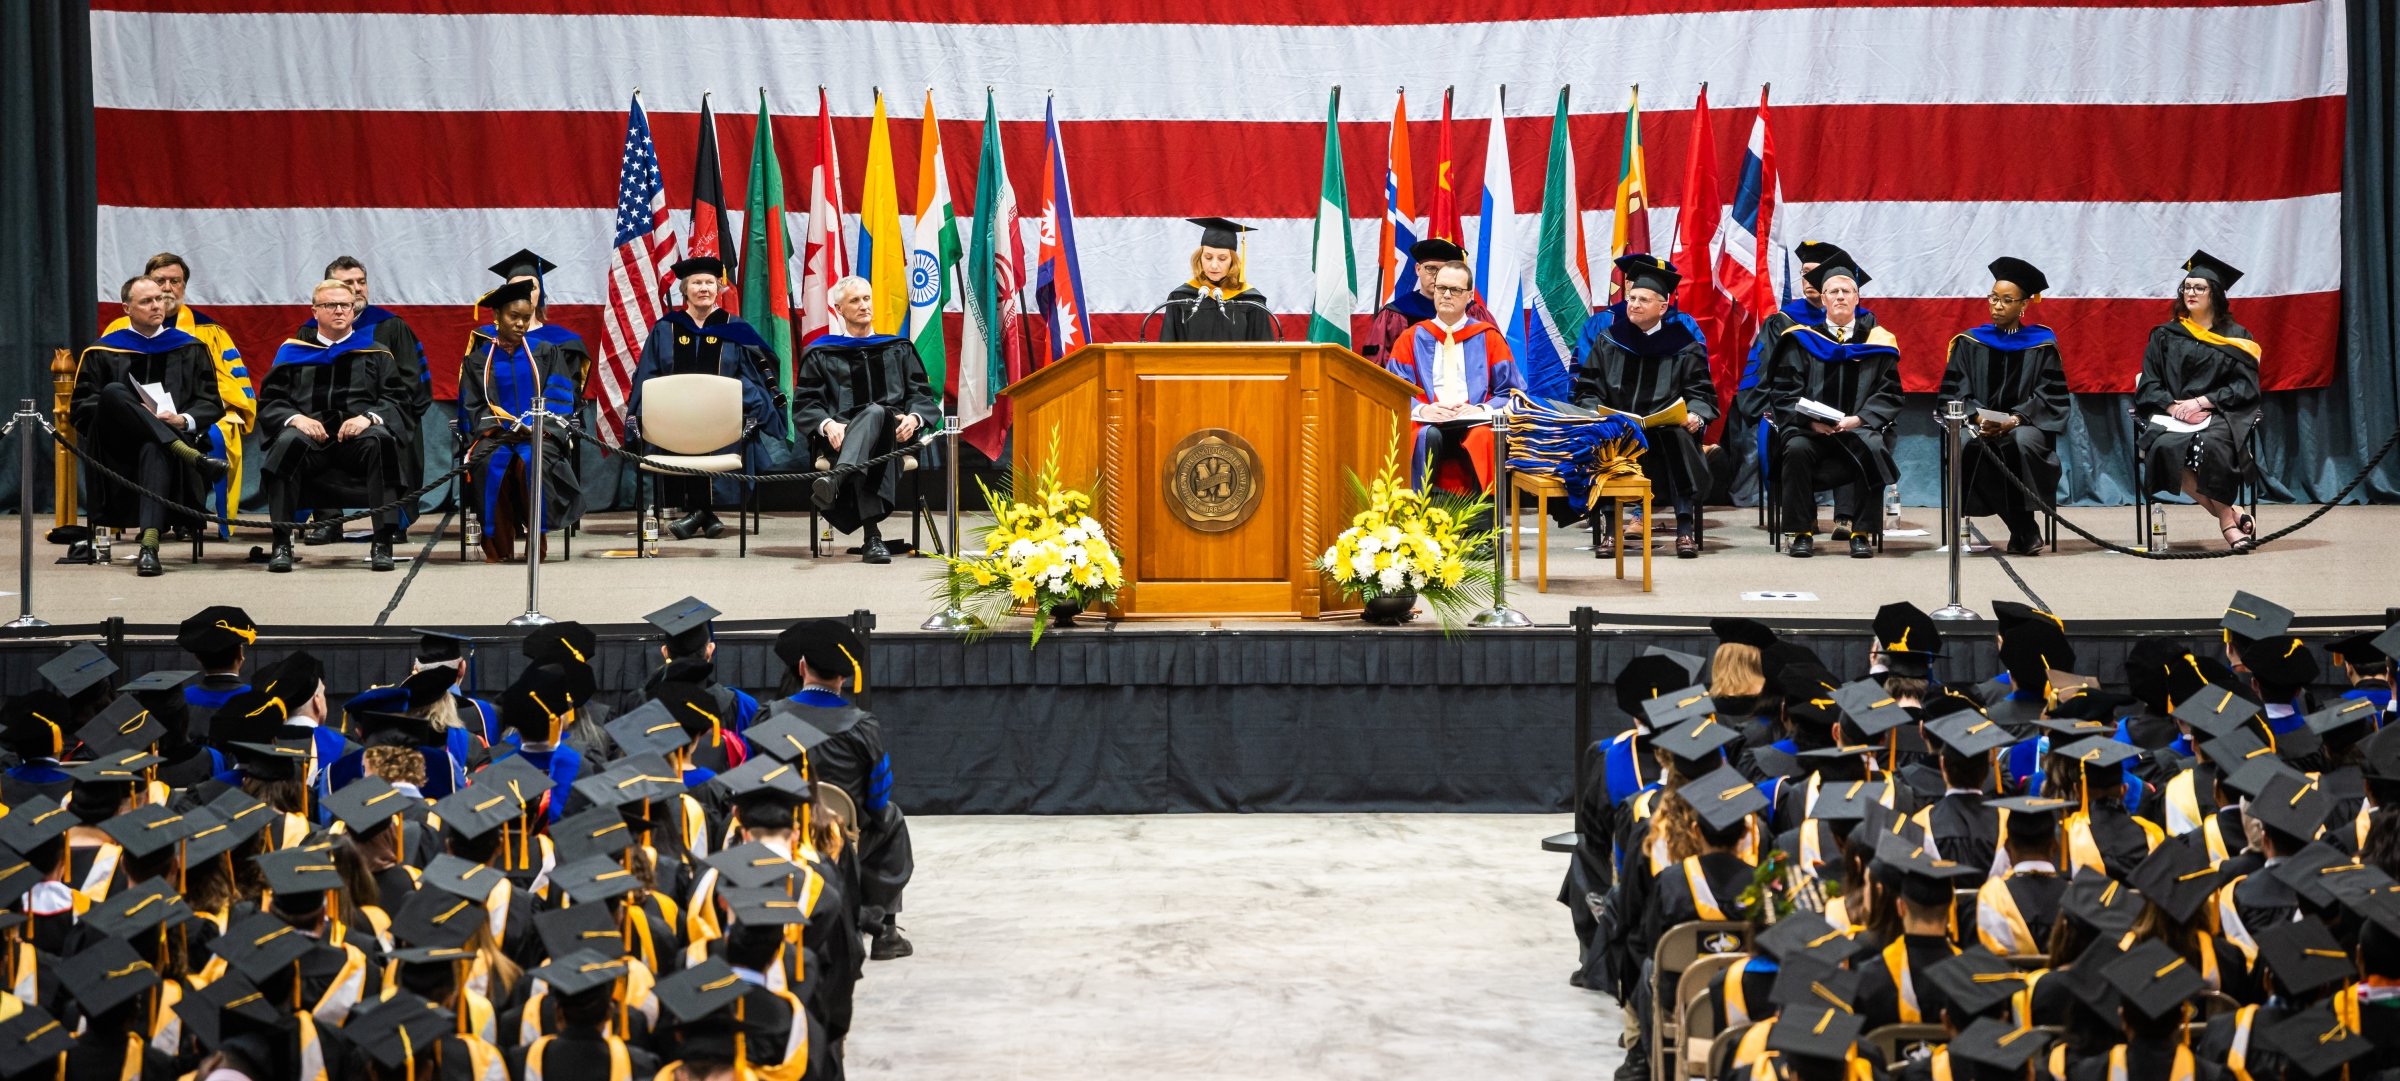 Graduate and PhD candidates at commencement